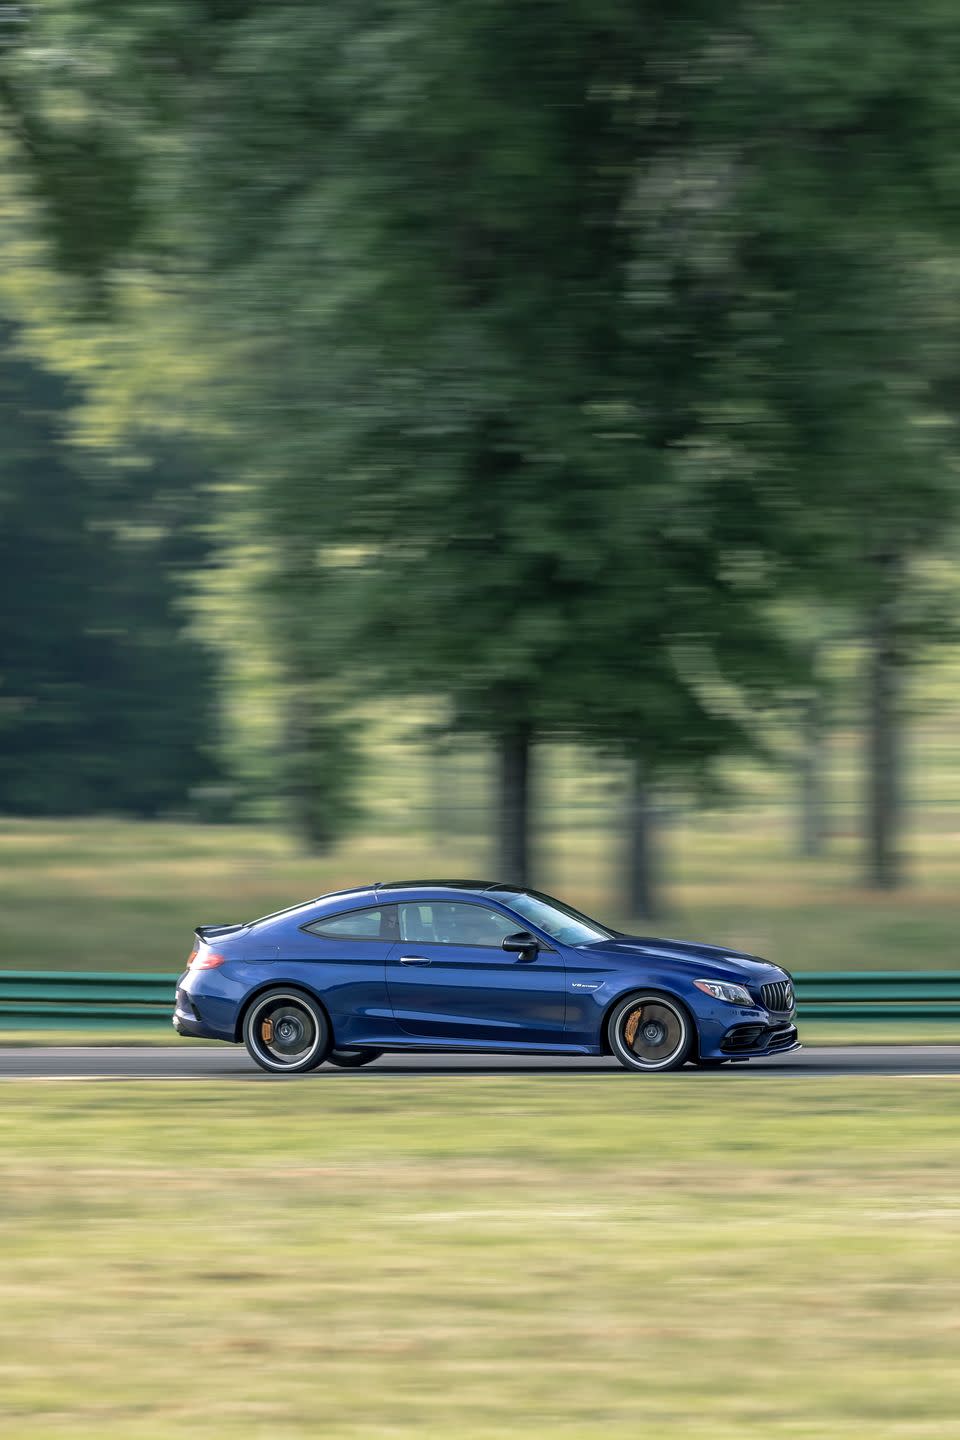 Photos of the 2019 Mercedes-AMG C63 S Coupe at Lightning Lap